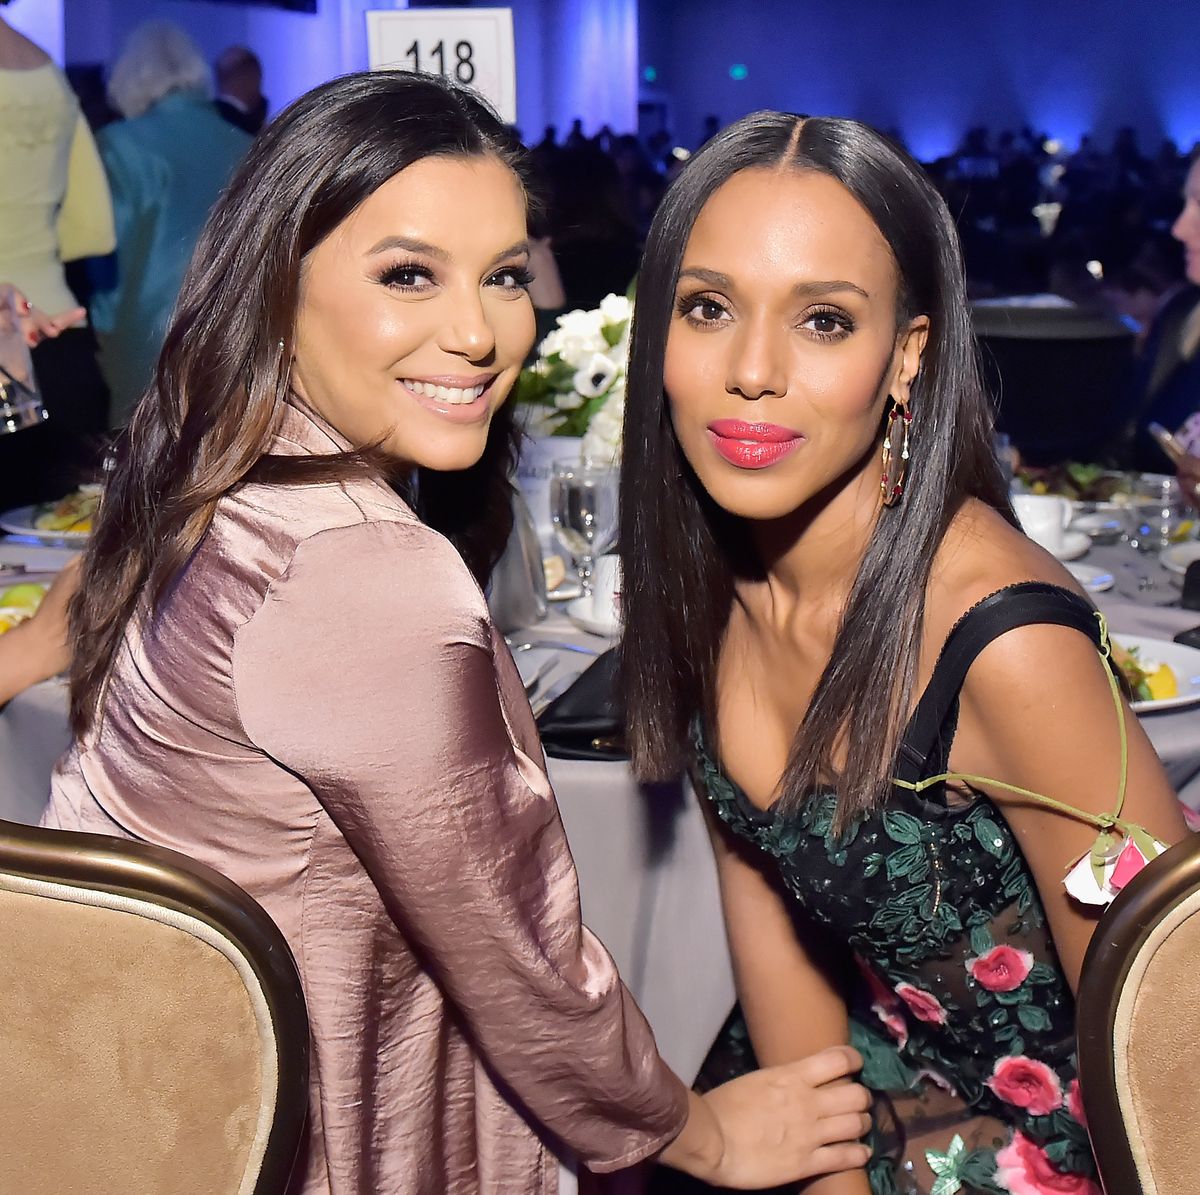 beverly hills, ca   february 20  actor producer eva longoria l and honoree kerry washington attend the costume designers guild awards at the beverly hilton hotel on february 20, 2018 in beverly hills, california  photo by stefanie keenangetty images for jumpline